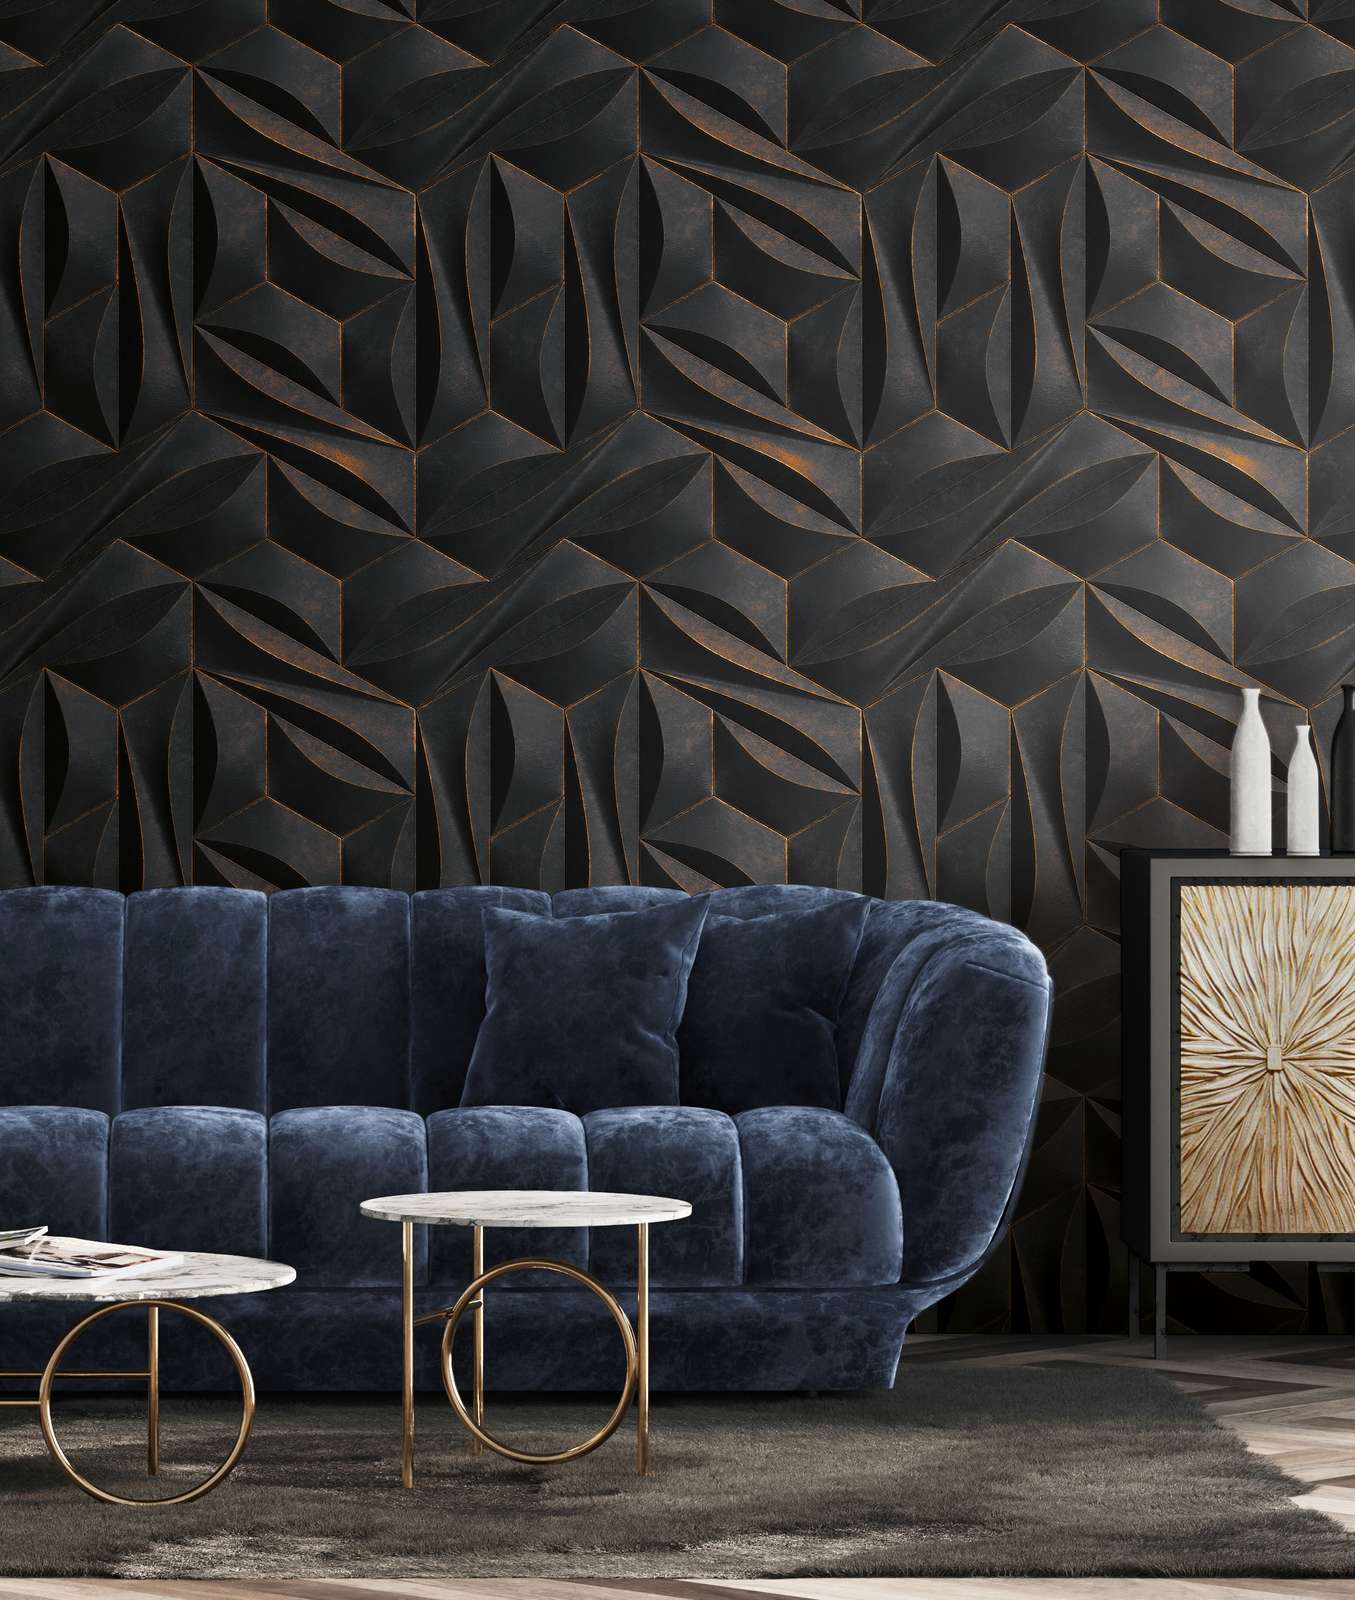             3D optics pattern wallpaper with metal look - anthracite, gold
        